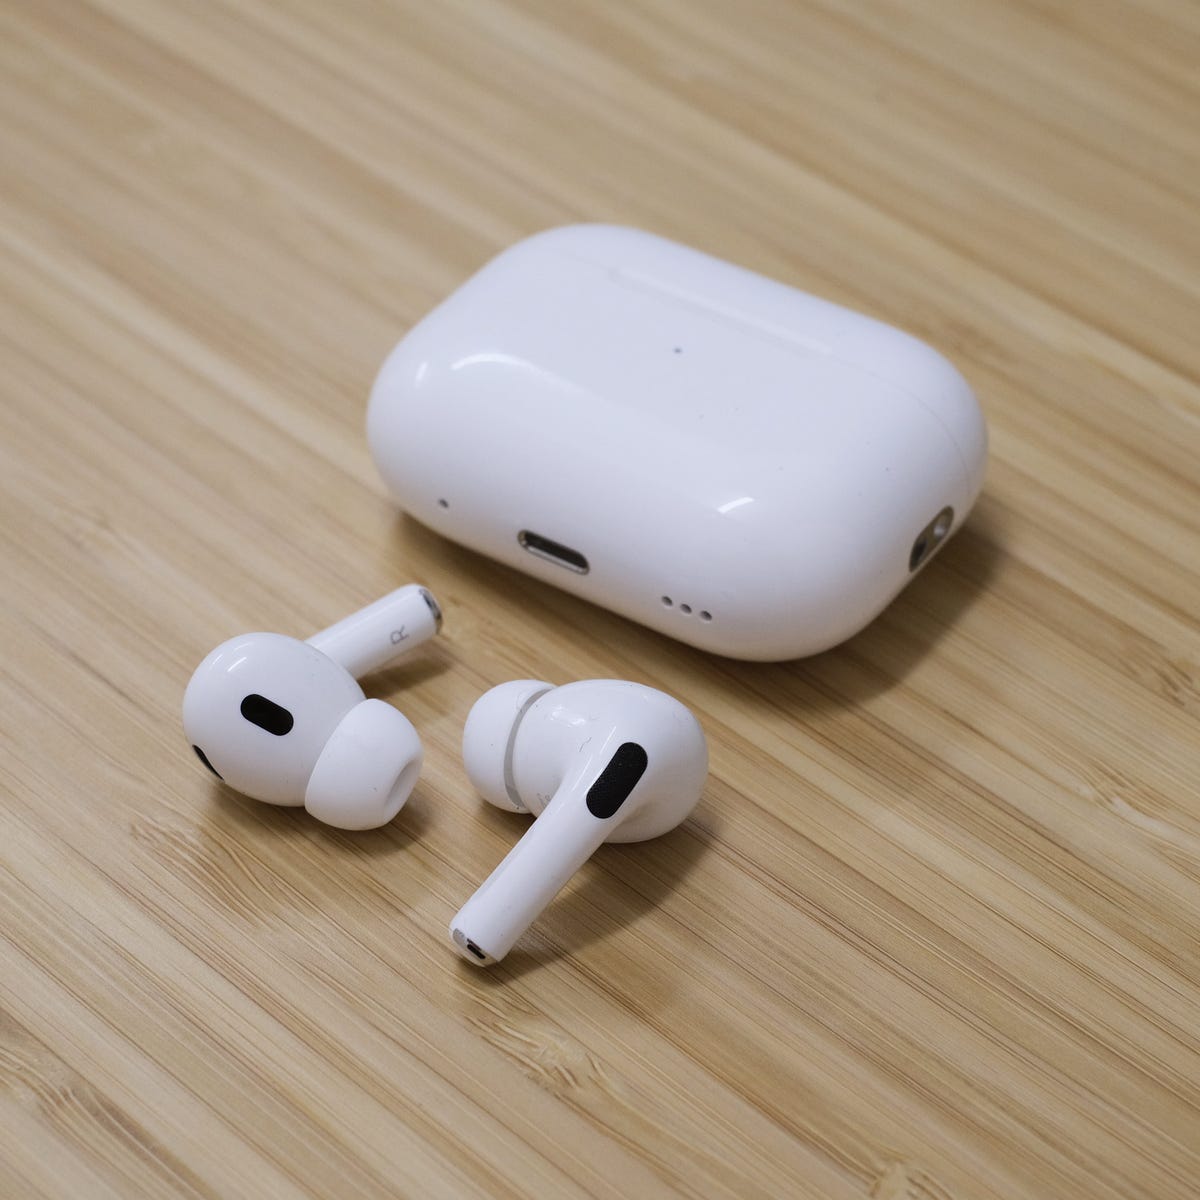 Apple AirPods Pro 2nd Gen: 6 tips and to get the most out of Apple's newest wireless earbuds ZDNET